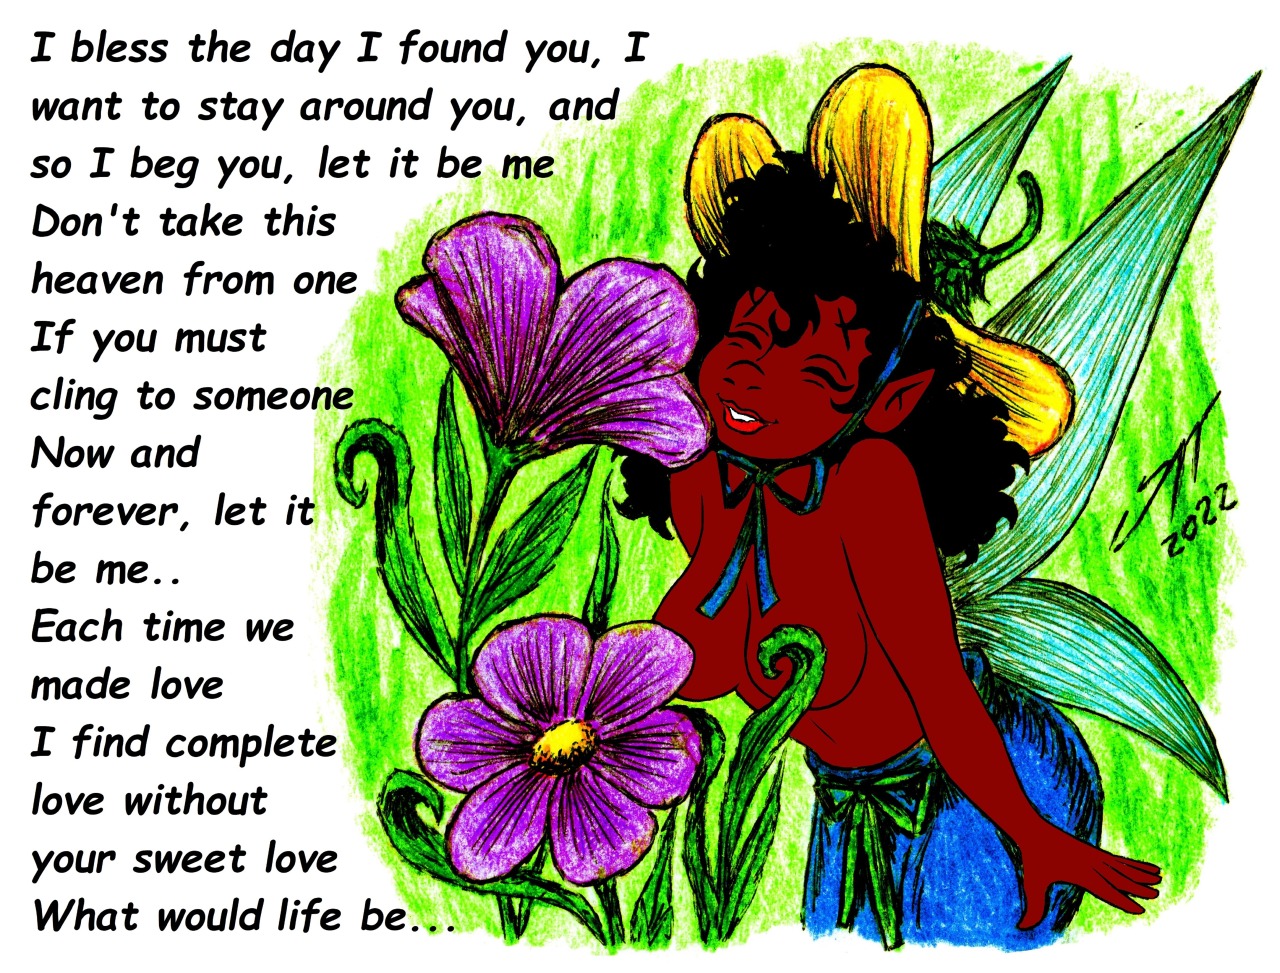 WHAT A WONDERFUL GARDEN!!Everyone knows that Lilly has the MOST EXOTIC, COLORFUL AND BEAUTIFUL garden in all of Pixie Hollow; What they often dont understand is how much it costs to keep it as beautiful as it is.Lilly always tells the other garden fairies that having a beautiful garden is very demanding, it requires a lot of time to feed the plants, give them water, fertilizer, keep pests away, prune the leaves, remove the withered parts, cover them from hail, protect them from animals that damage them... and a long etcetera.But for Lilly, the most important part is LOVE; If you have plants, it is to LOVE THEM, because they are LIVING beings that need affection, tenderness, dedication and that those who take care of them have RESPONSIBILITY.BRAVO, LILLY!!Lyrics from the song “Let It Be Me” by Sonny & Cher. #fairy lilly#lilly garden#lilly flowers#lilly love#garden fairy#fairies garden#loving plants#beautiful garden#Disney Fairies #disney fairies books  #disney fairies fan art  #disney fairies art #fairies#fairies art#cute fairies#beautiful fairies#Lovely fairies#adorable fairies#pretty fairies#tinkerbell friends#Pixie Hollow #pixie hollow art